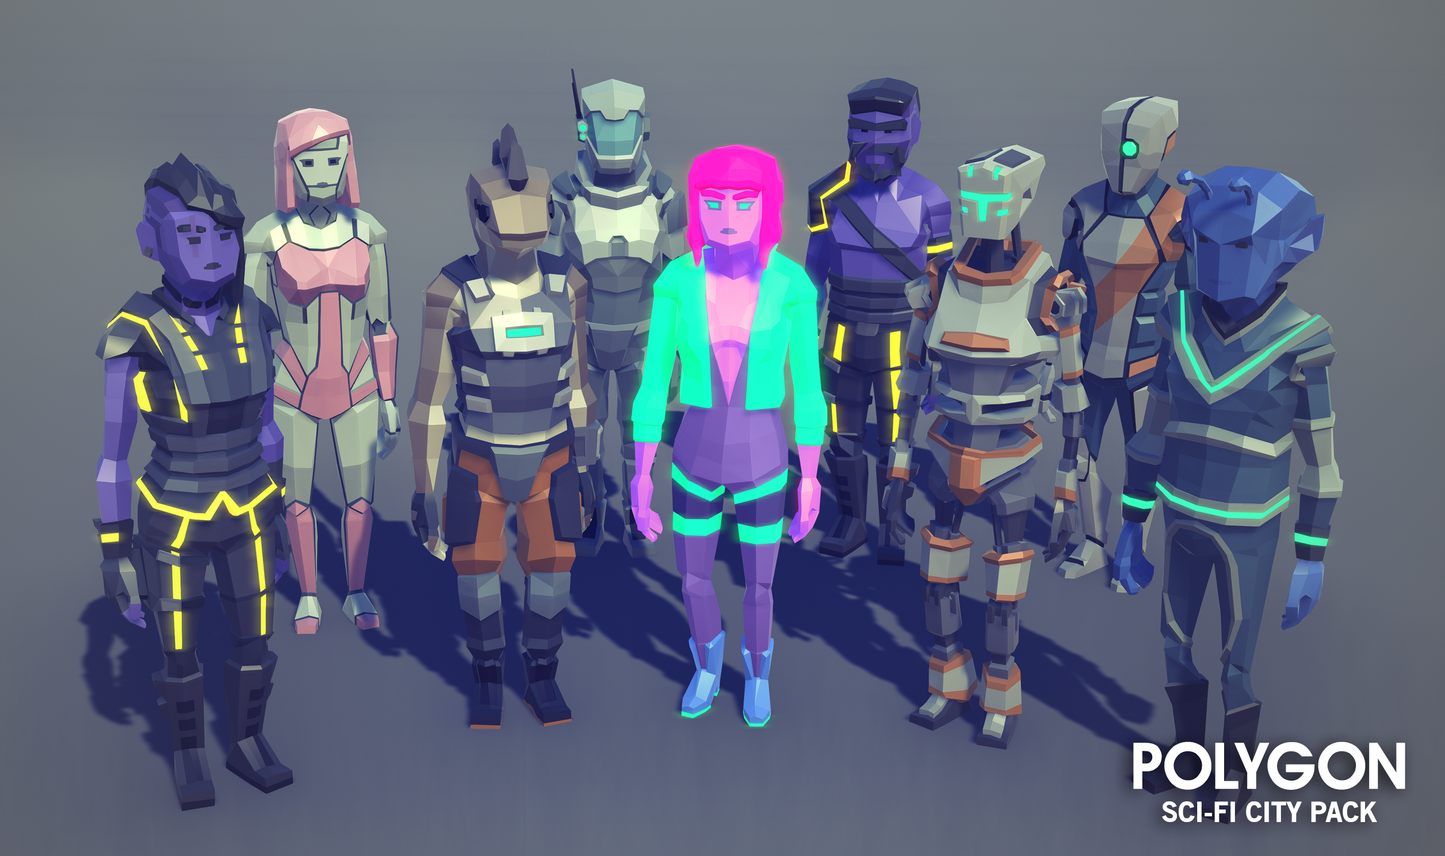 A group of sci-fi characters made up of human, android and alien standing together